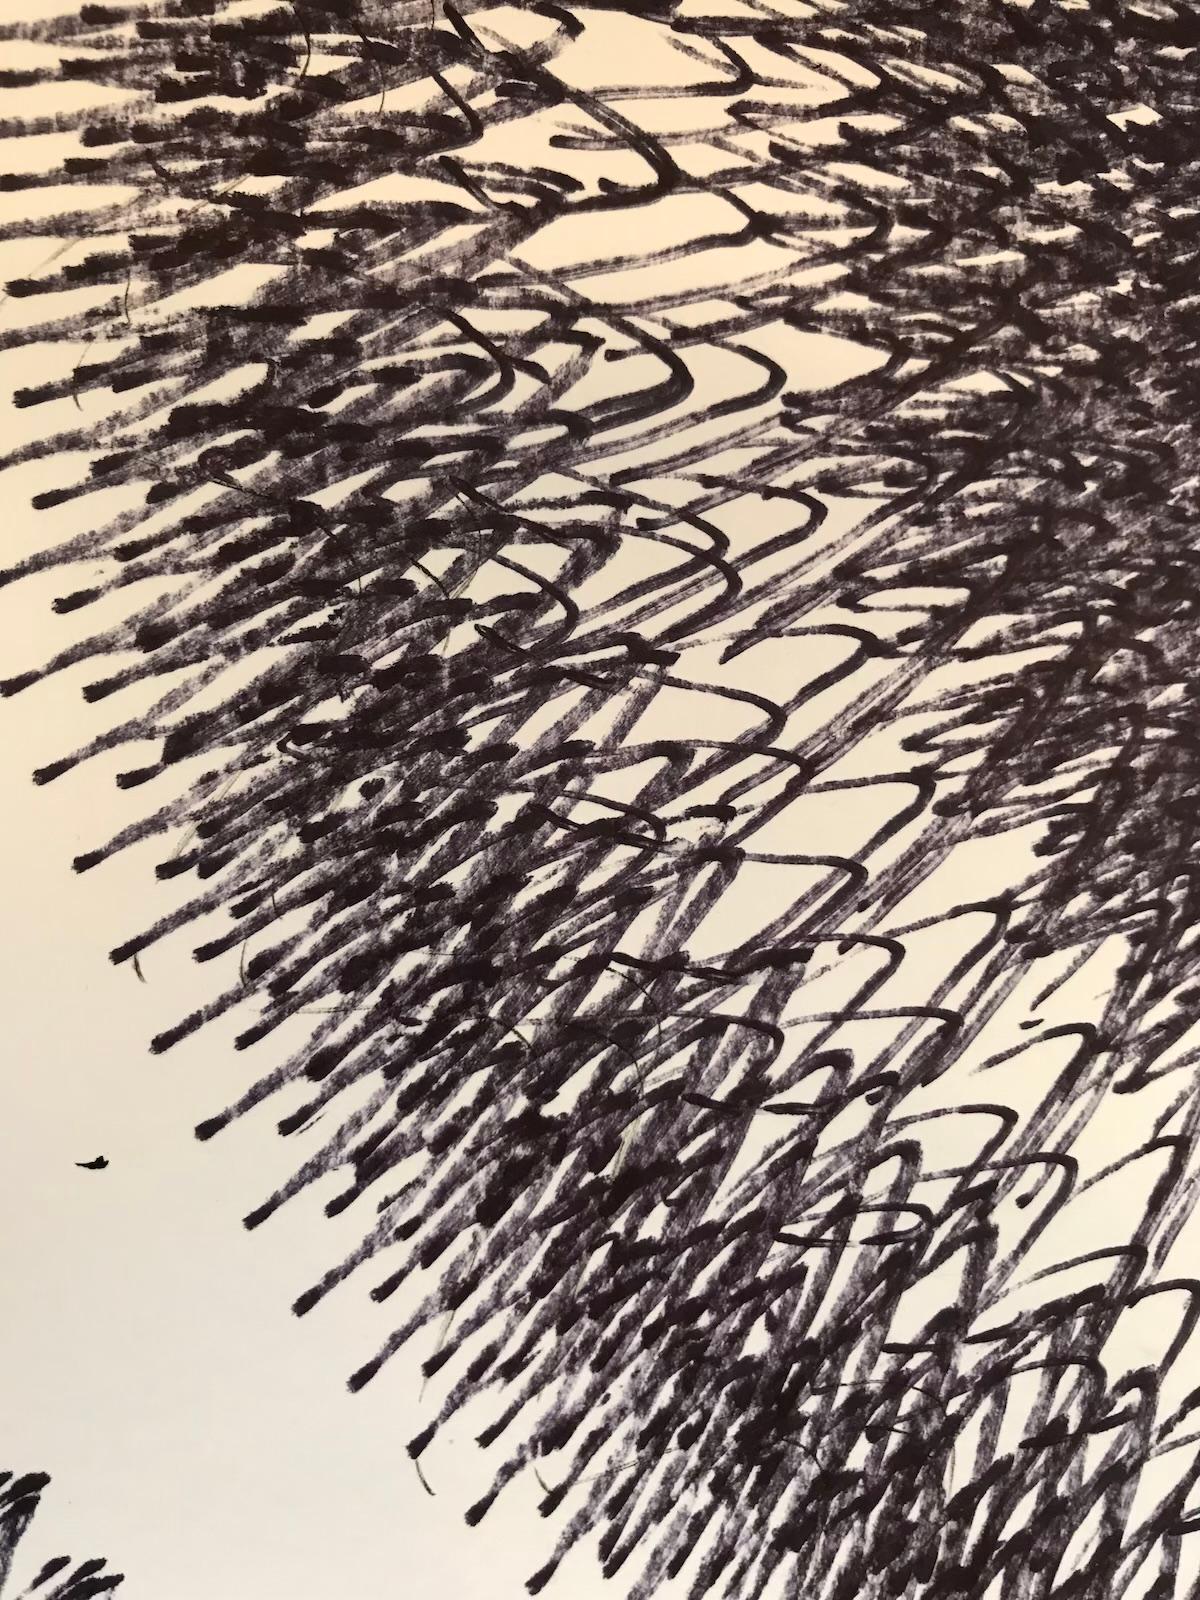 Original abstract painting depicting the sounds of a bird flock.
Nigel Bird has wonderful artworks for sale online and in our art gallery at Wychwood Art. Nigel Bird Studied Fine Art (Sculpture and Printmaking) at Loughborough College of Art and